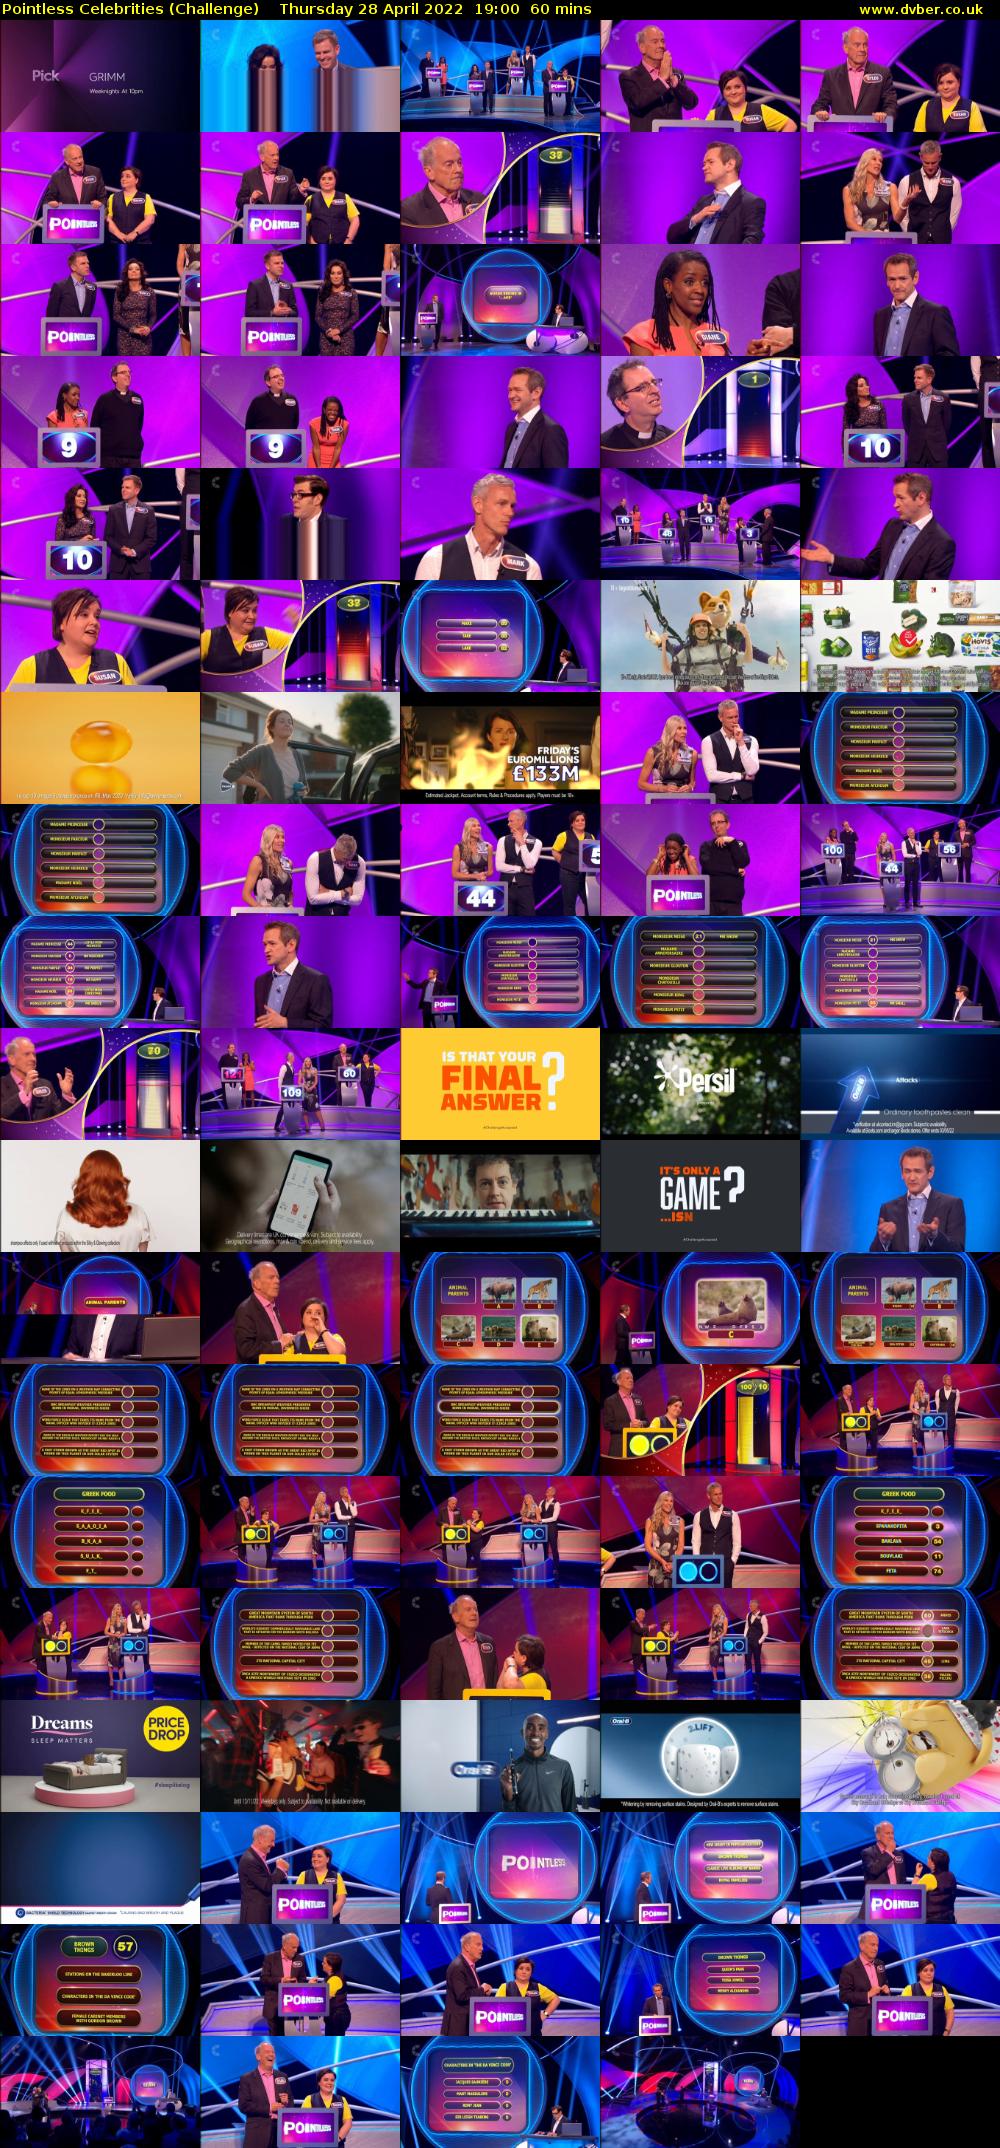 Pointless Celebrities (Challenge) Thursday 28 April 2022 19:00 - 20:00